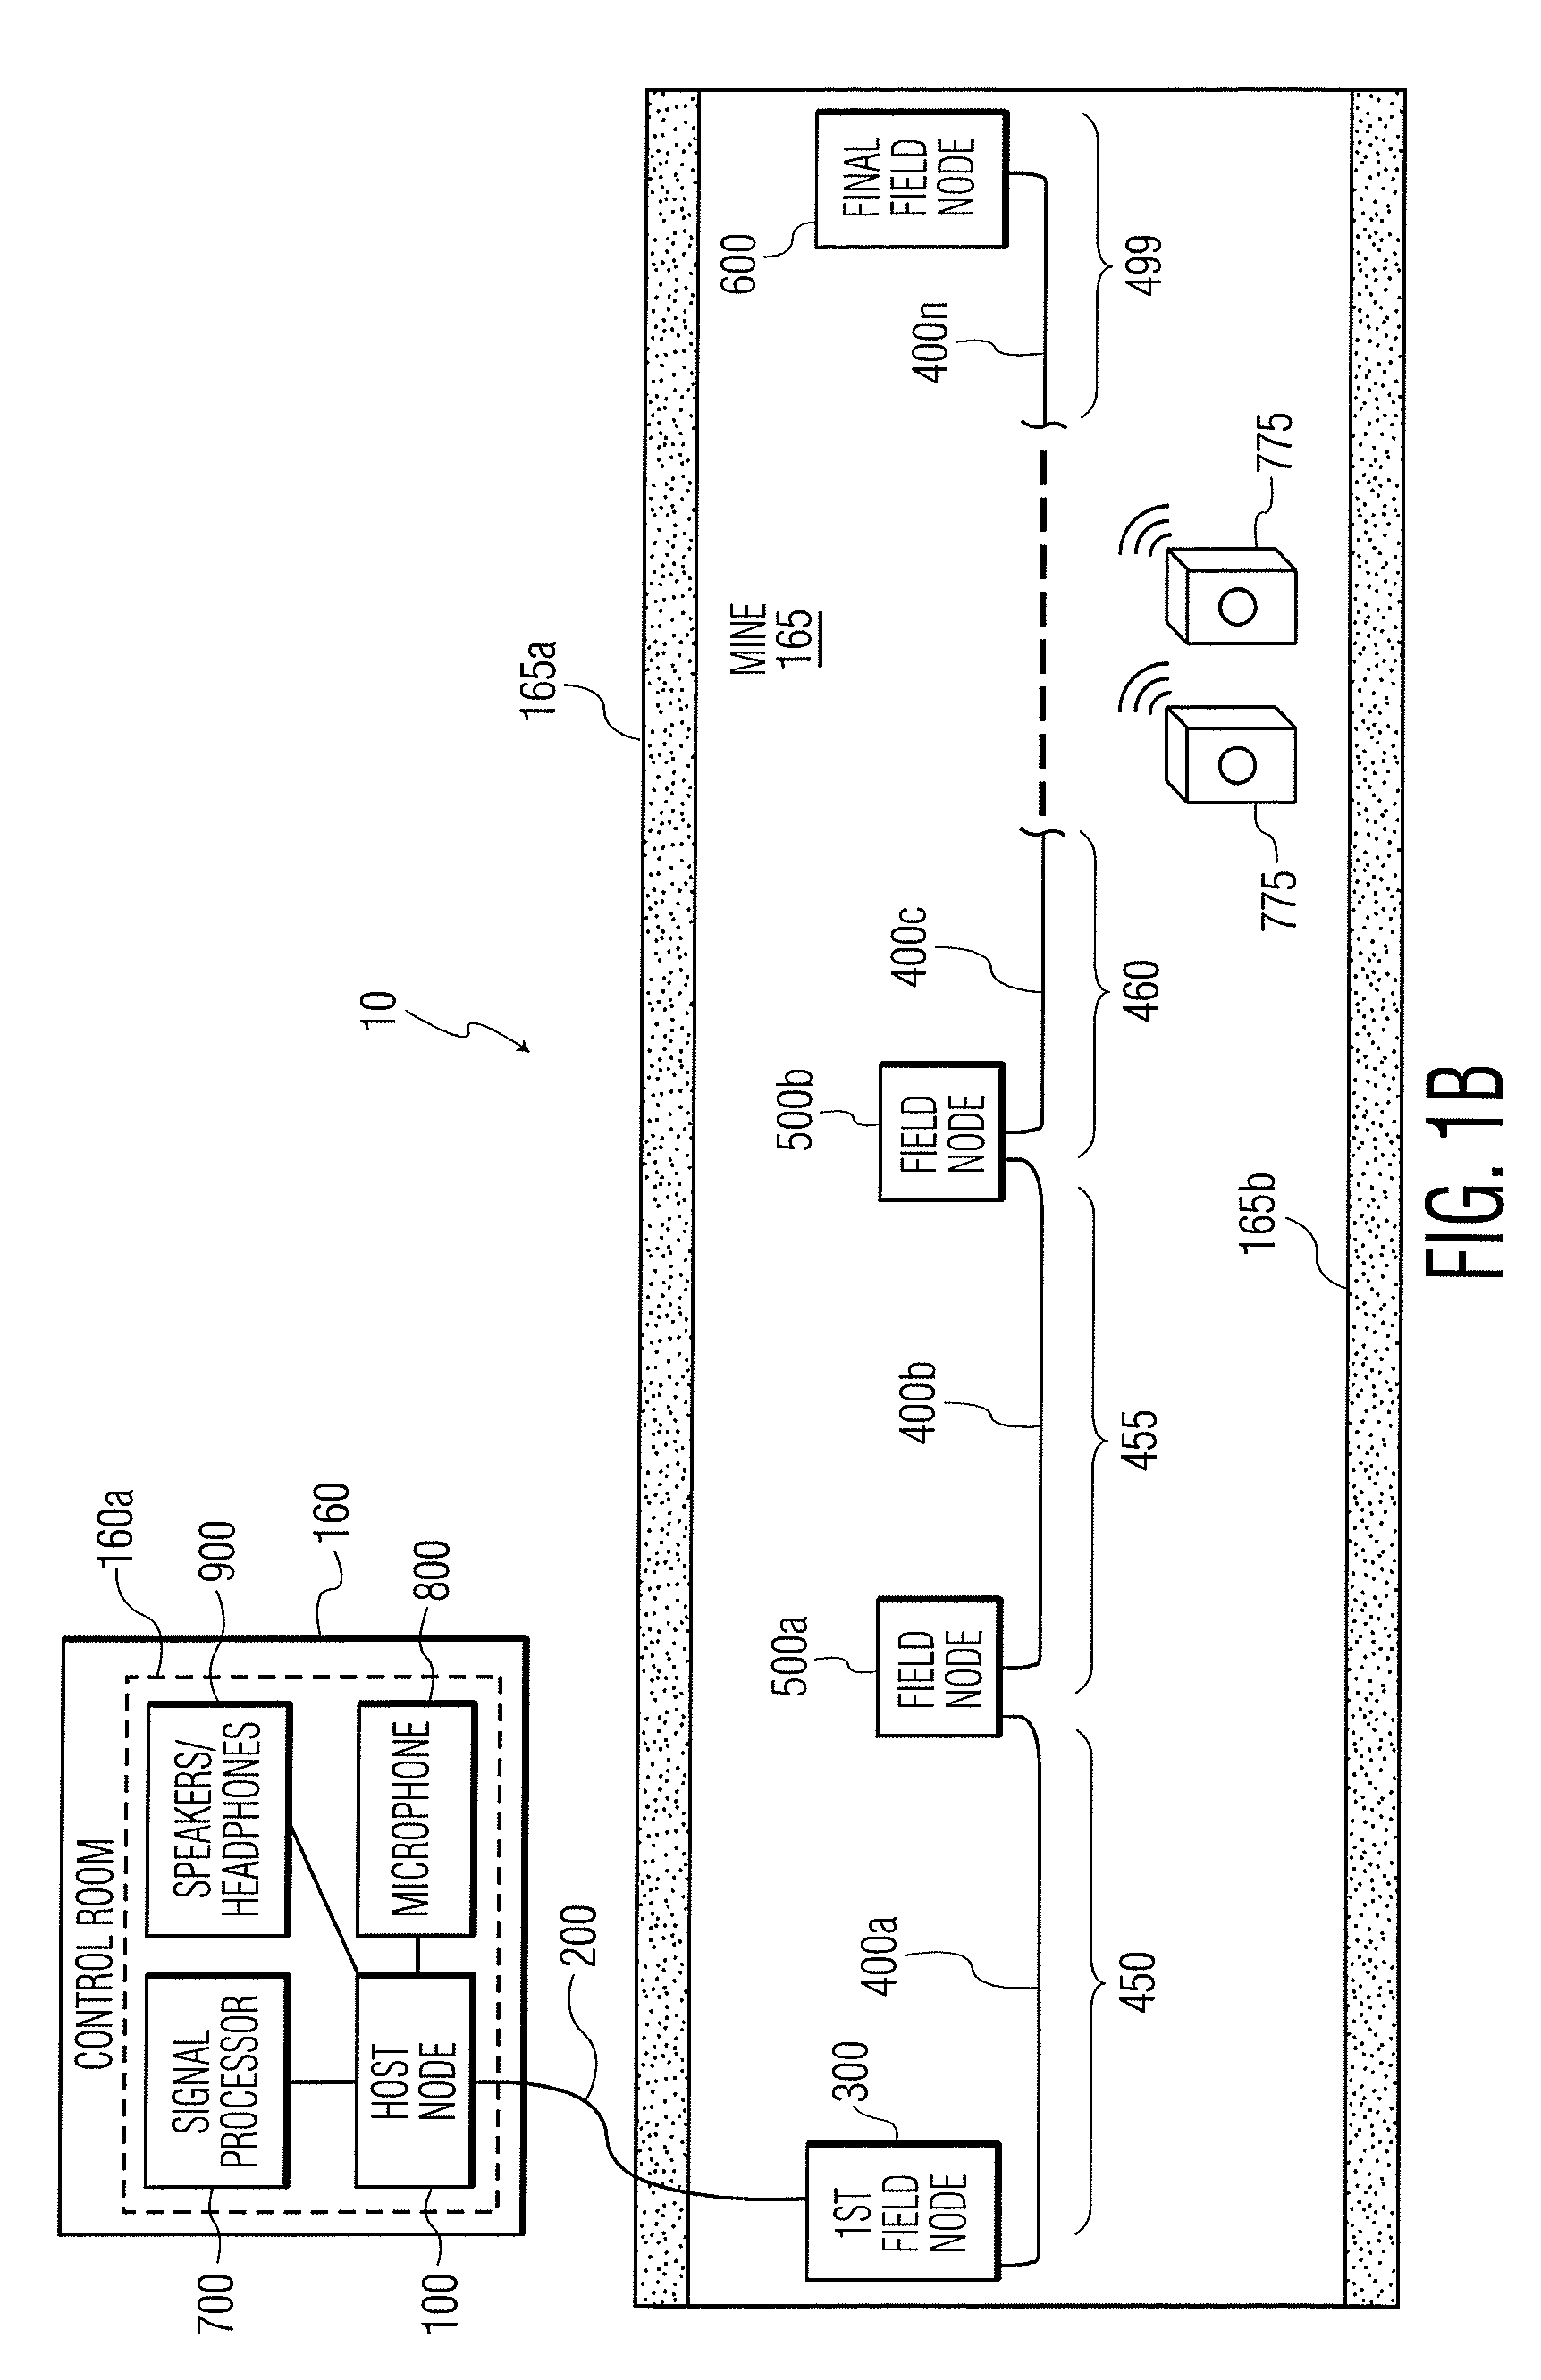 Fiber optic personnel safety systems and methods of using the same